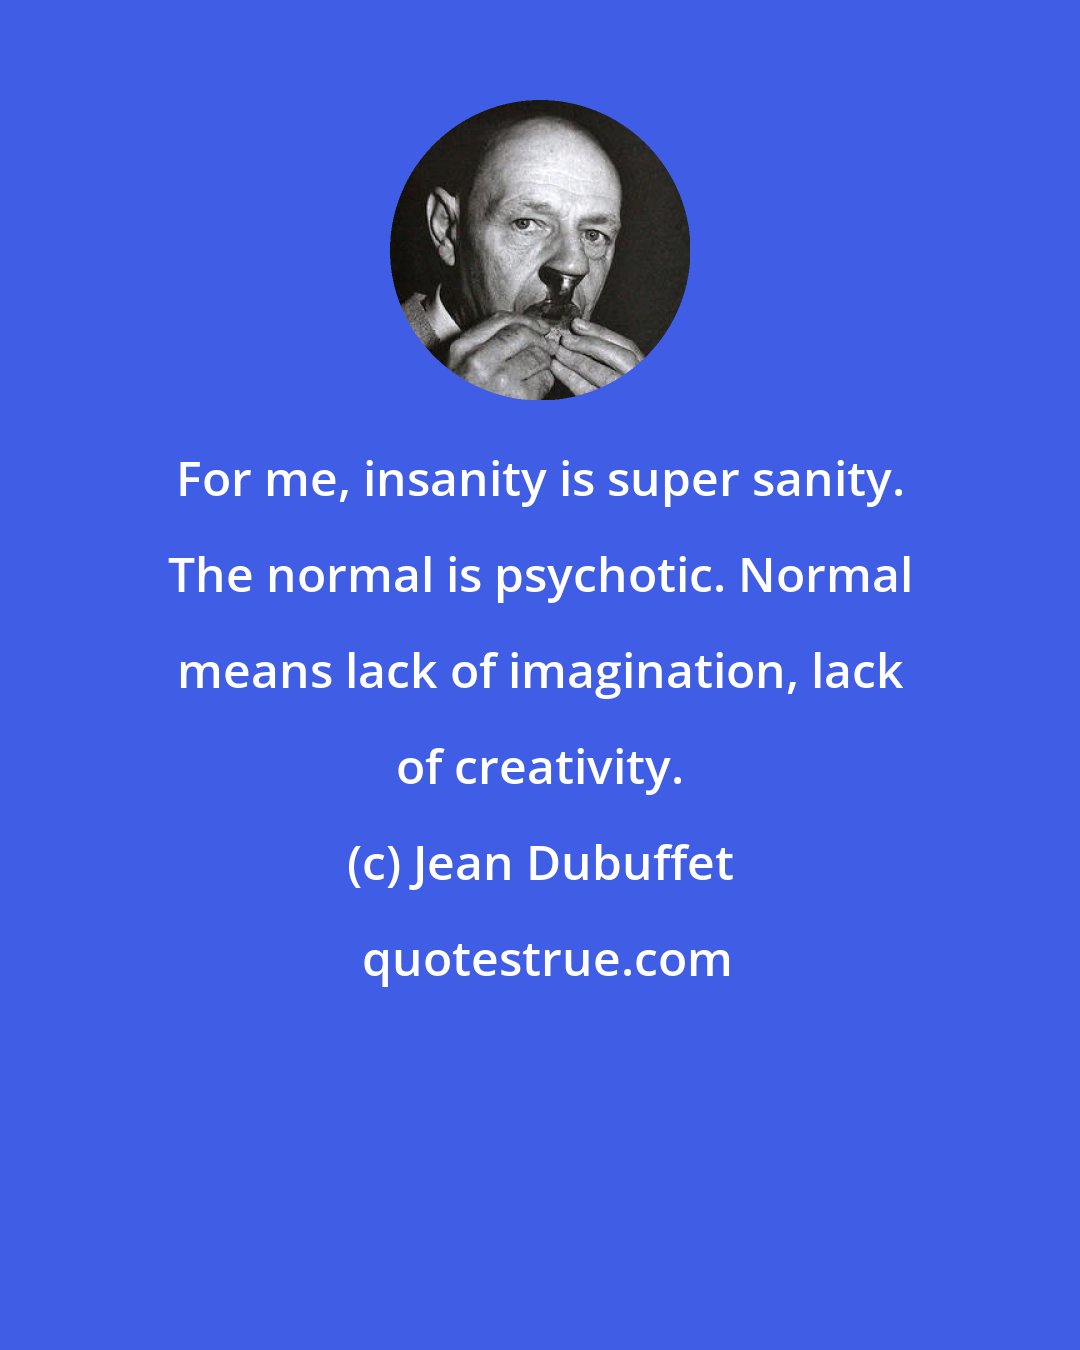 Jean Dubuffet: For me, insanity is super sanity. The normal is psychotic. Normal means lack of imagination, lack of creativity.